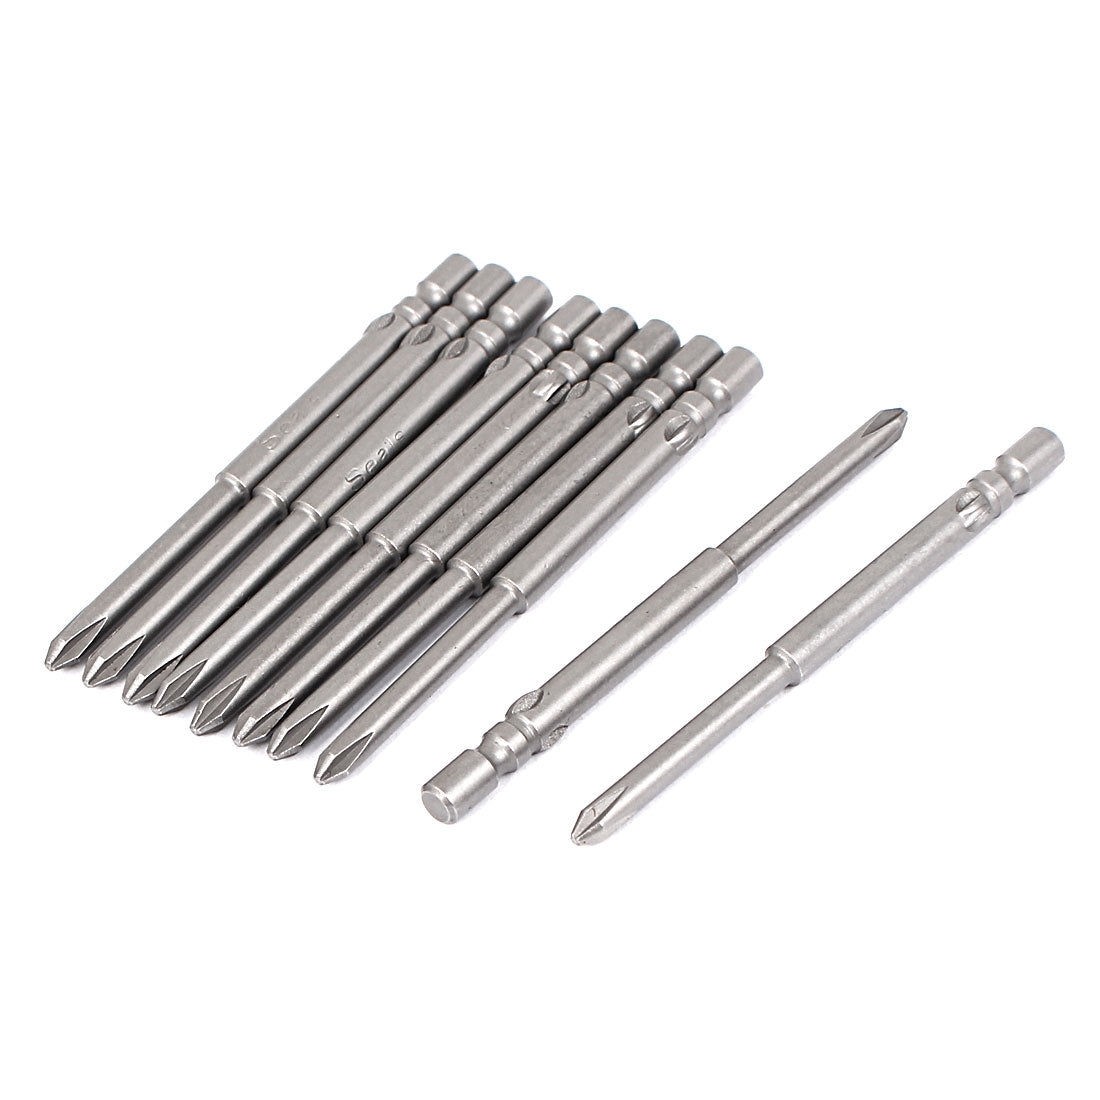 uxcell Uxcell 3mm PH1 Head 4mm Round Shank Magnetic Phillips Screwdriver Bits 10pcs